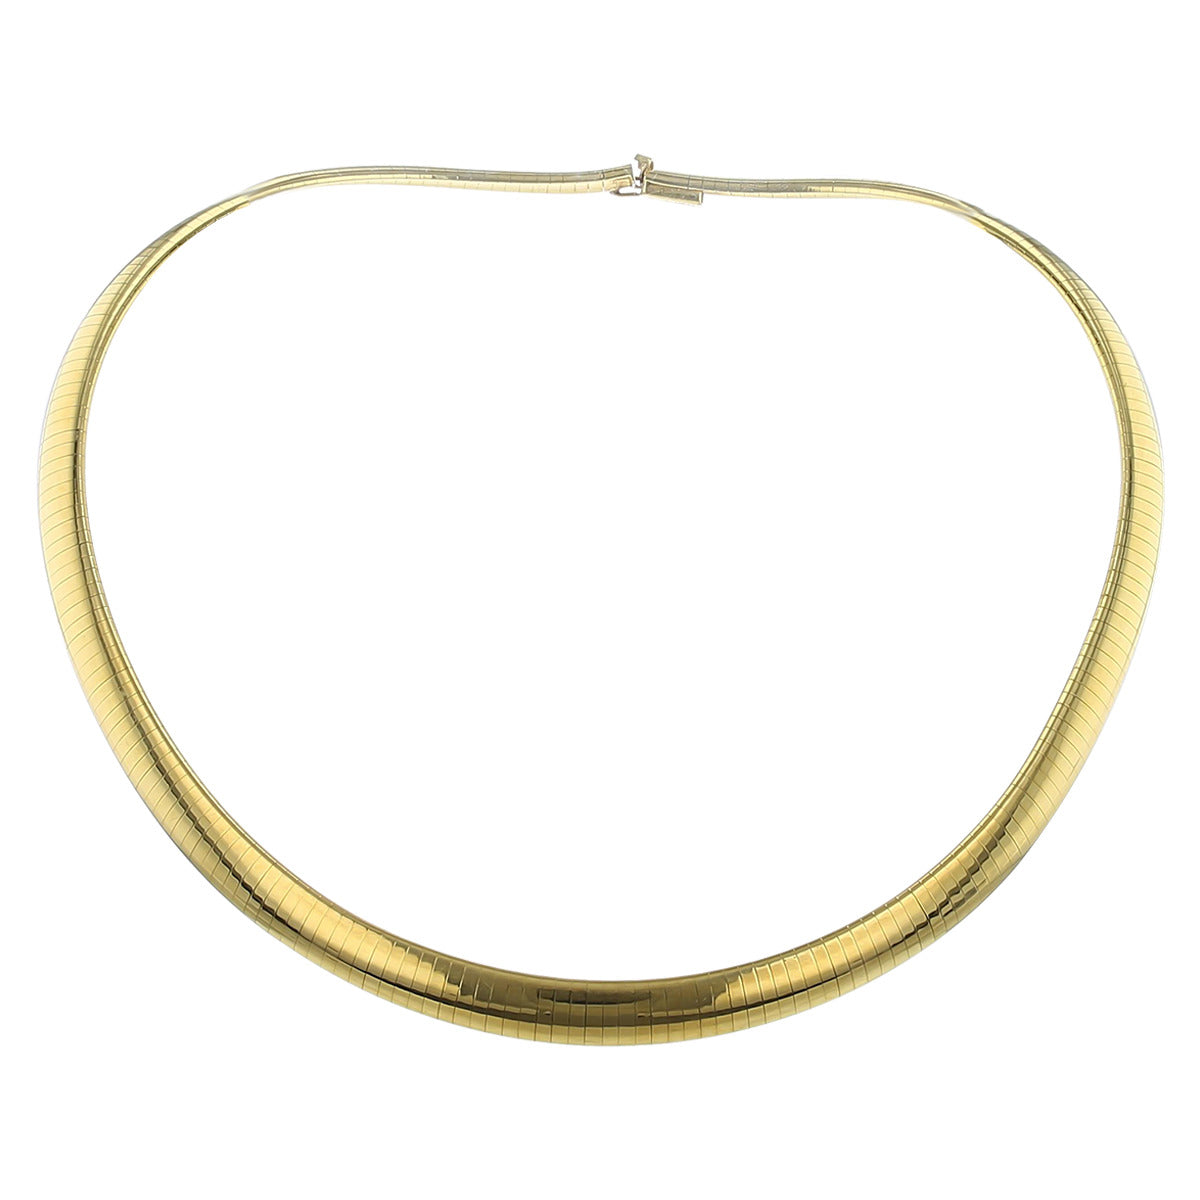 Buy Thick Omega Necklace in 14k Yellow Gold Online in India - Etsy